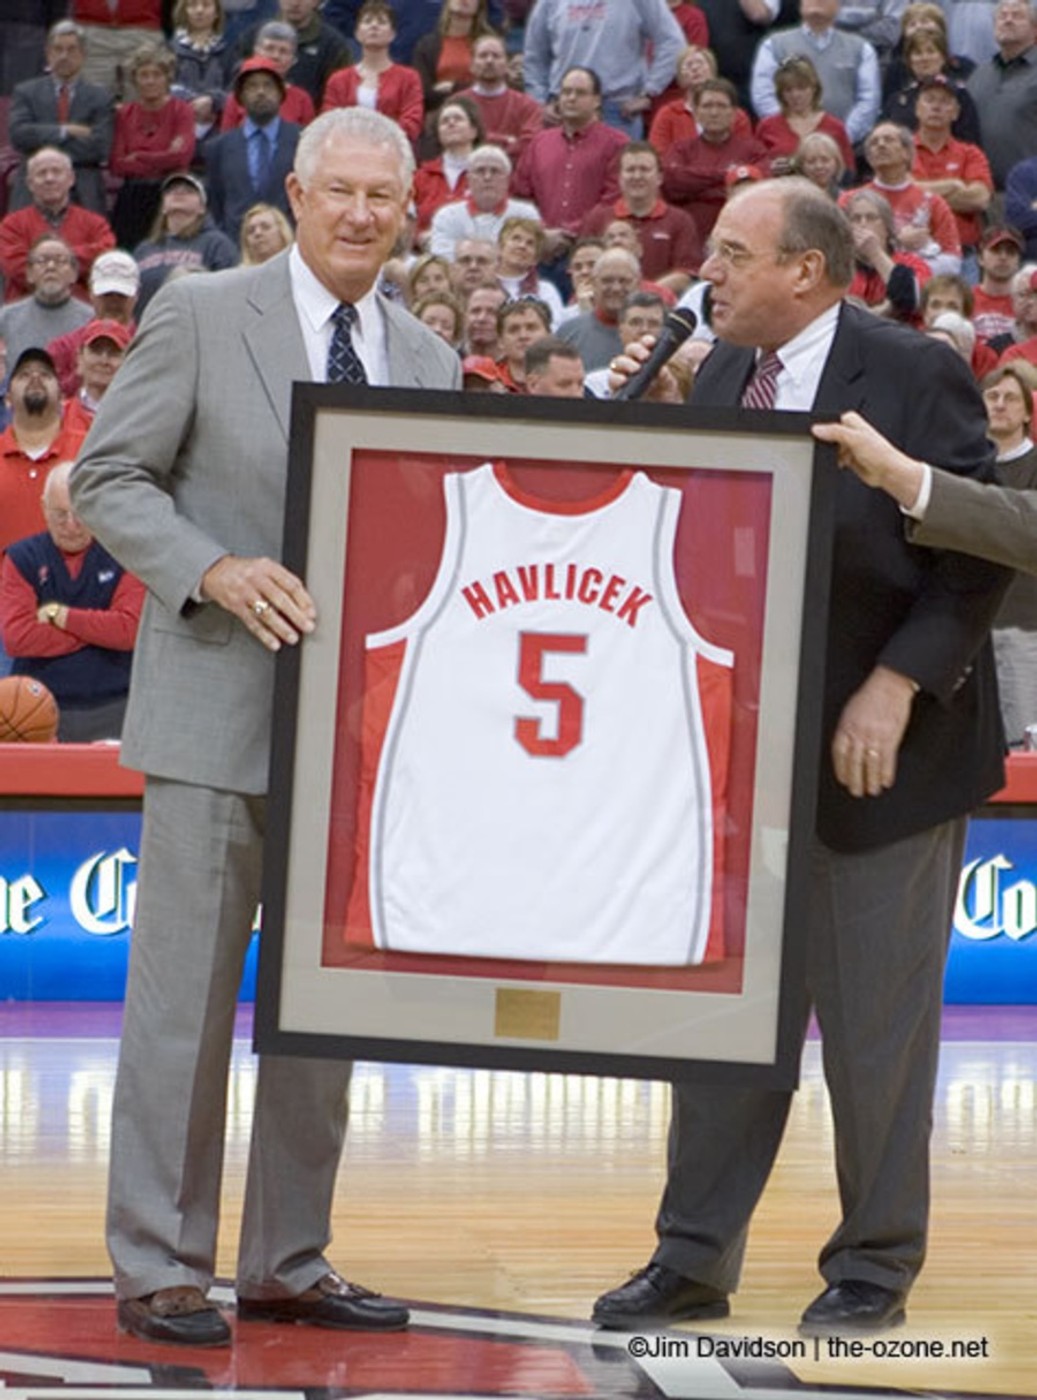 Ohio State to Wear Patches Honoring John Havlicek During Season